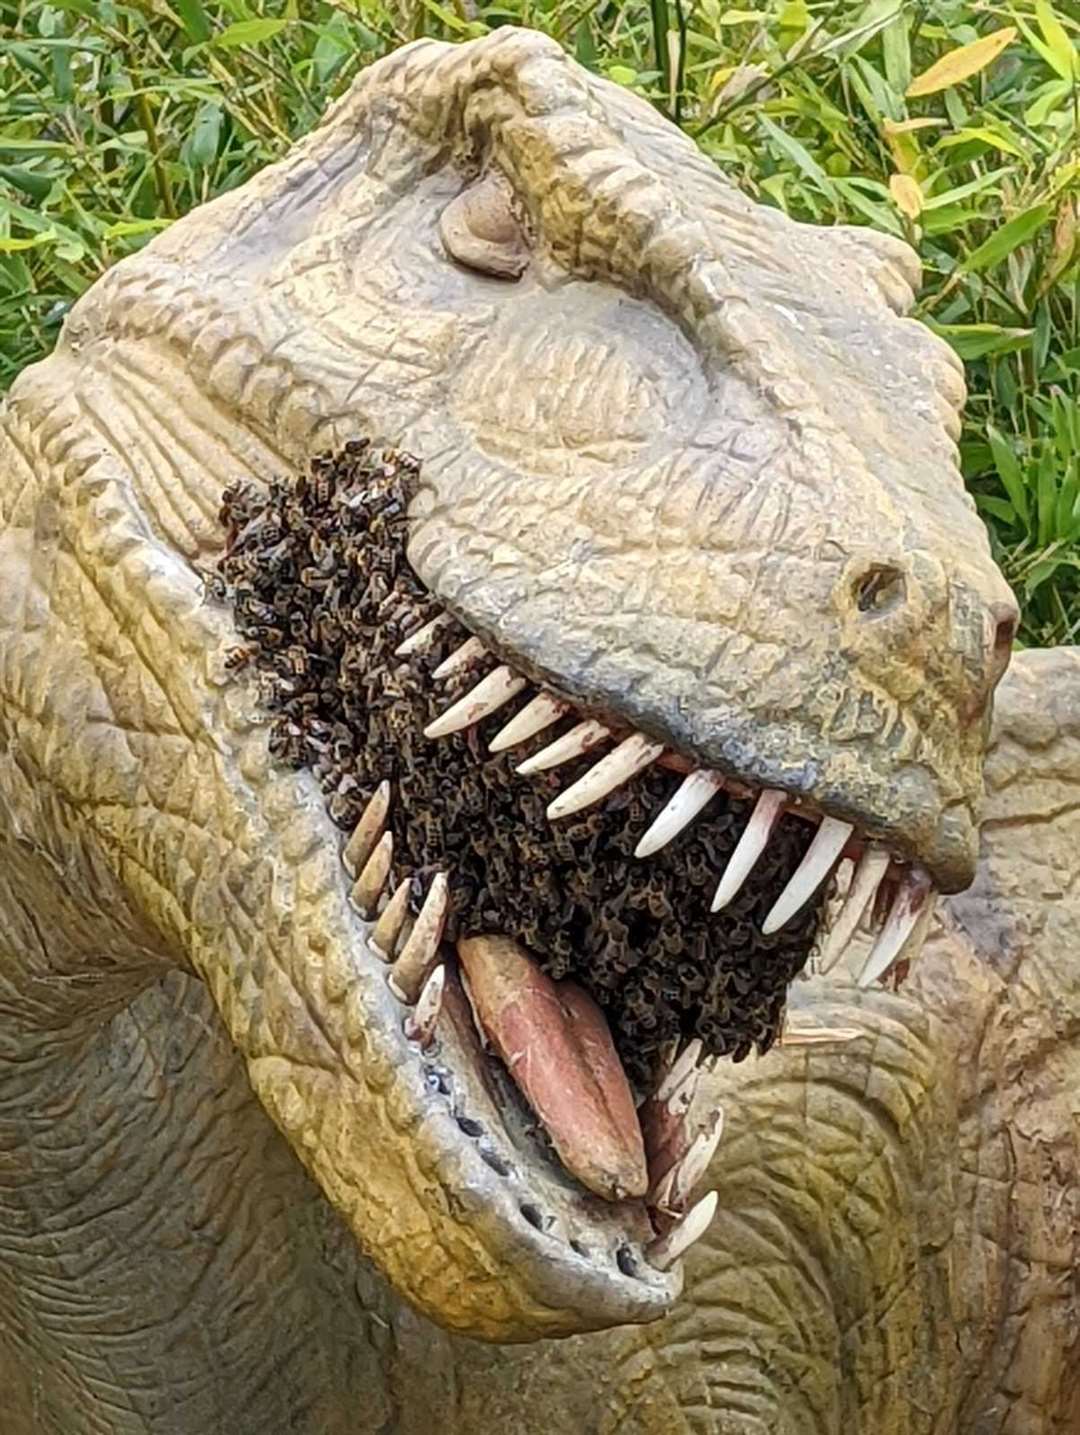 The dinosaur with a mouthful of bees